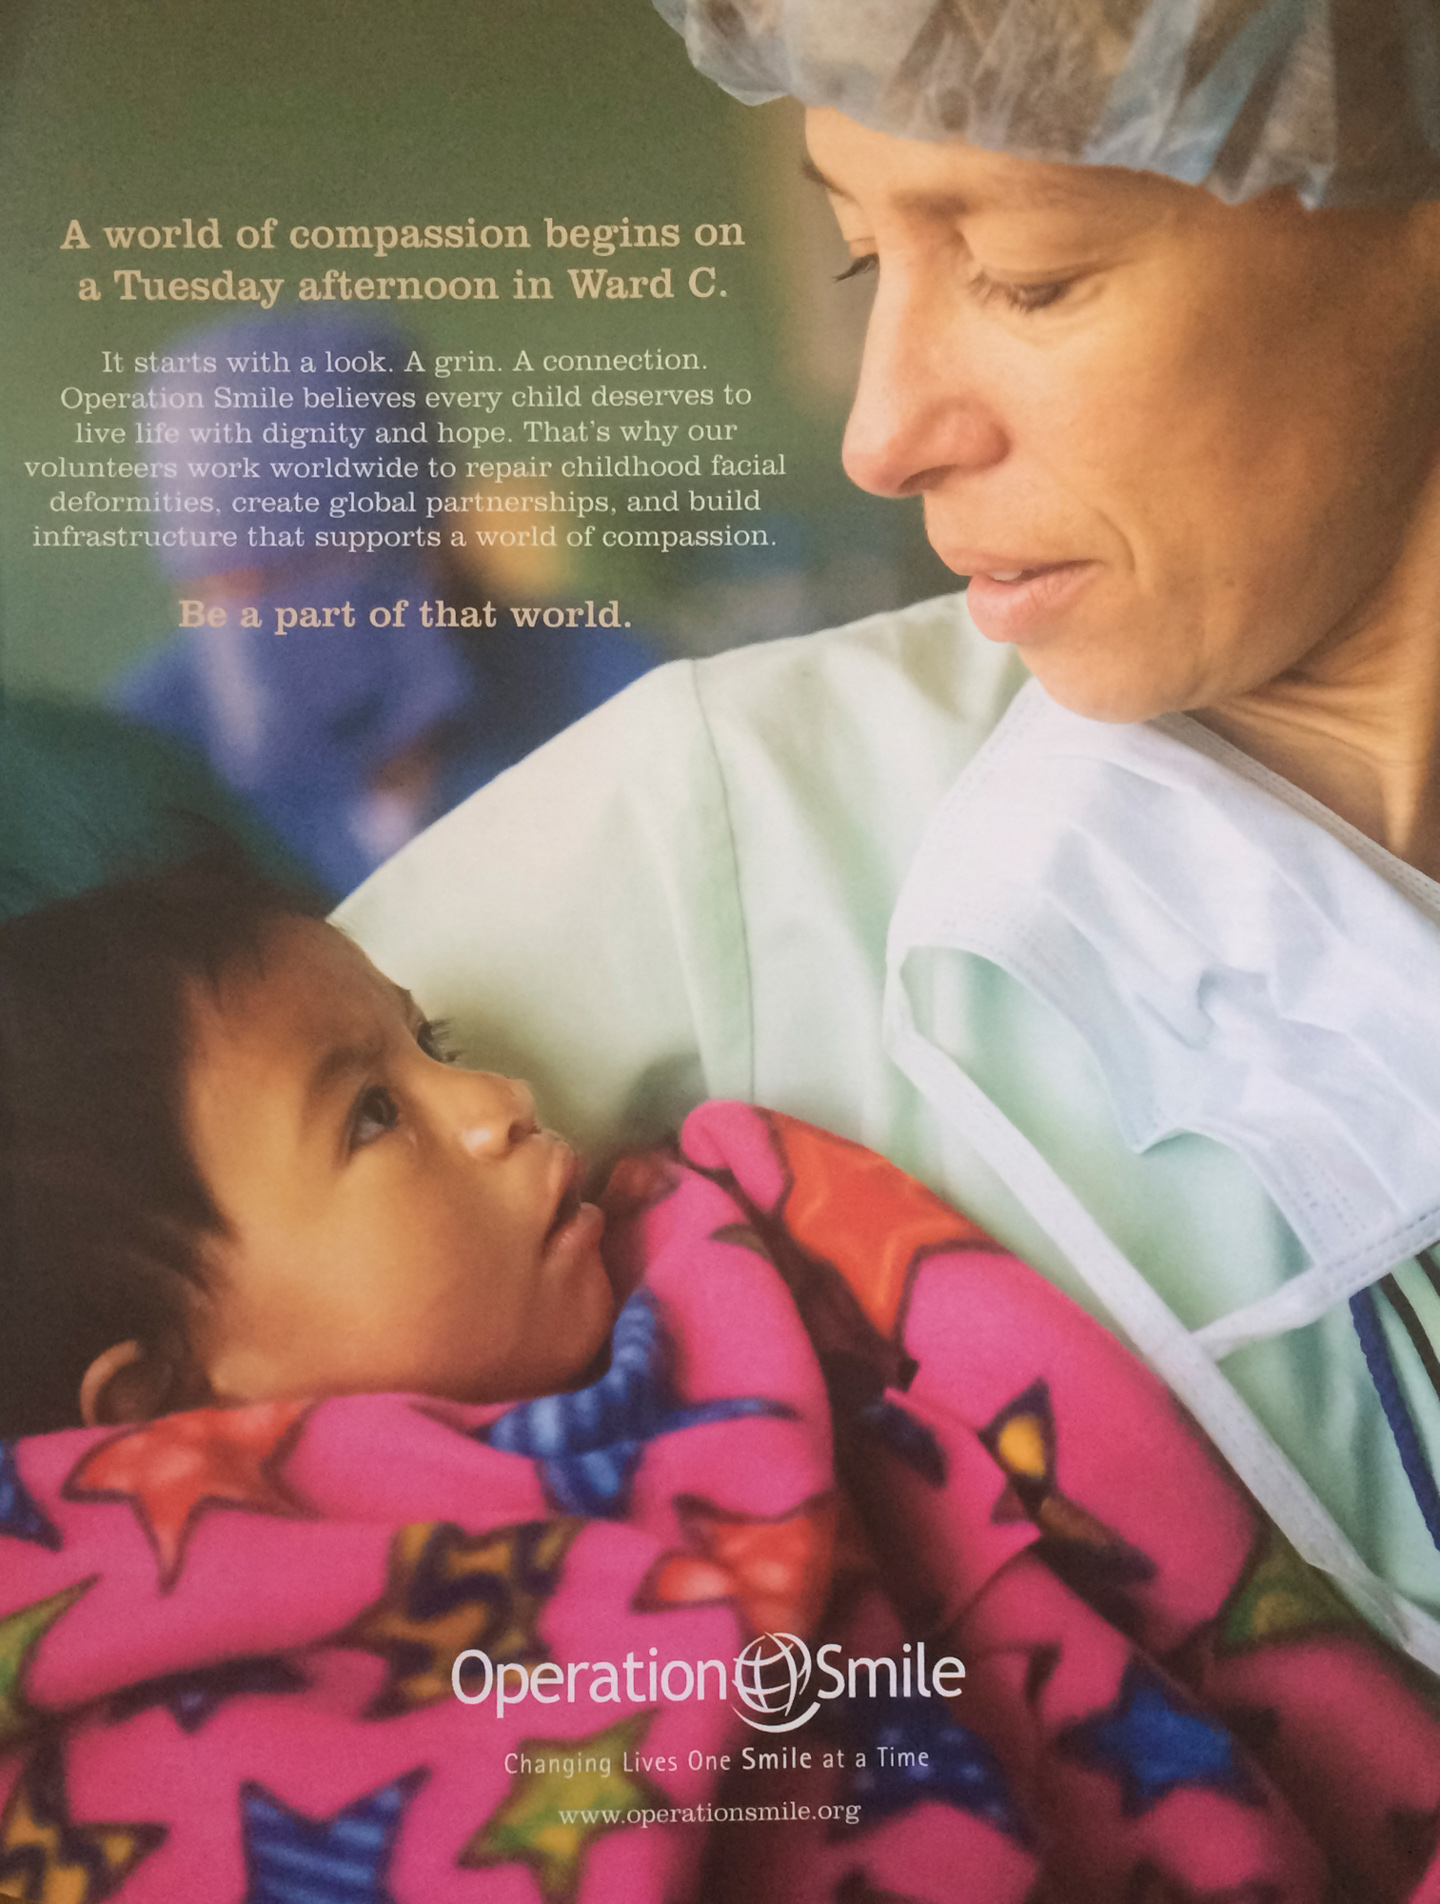 A nurse looks down at an infant waking up from surgery in an  Ad Campaign for Operation Smile photographed by Lifestyle Photographer Diana Mulvihill